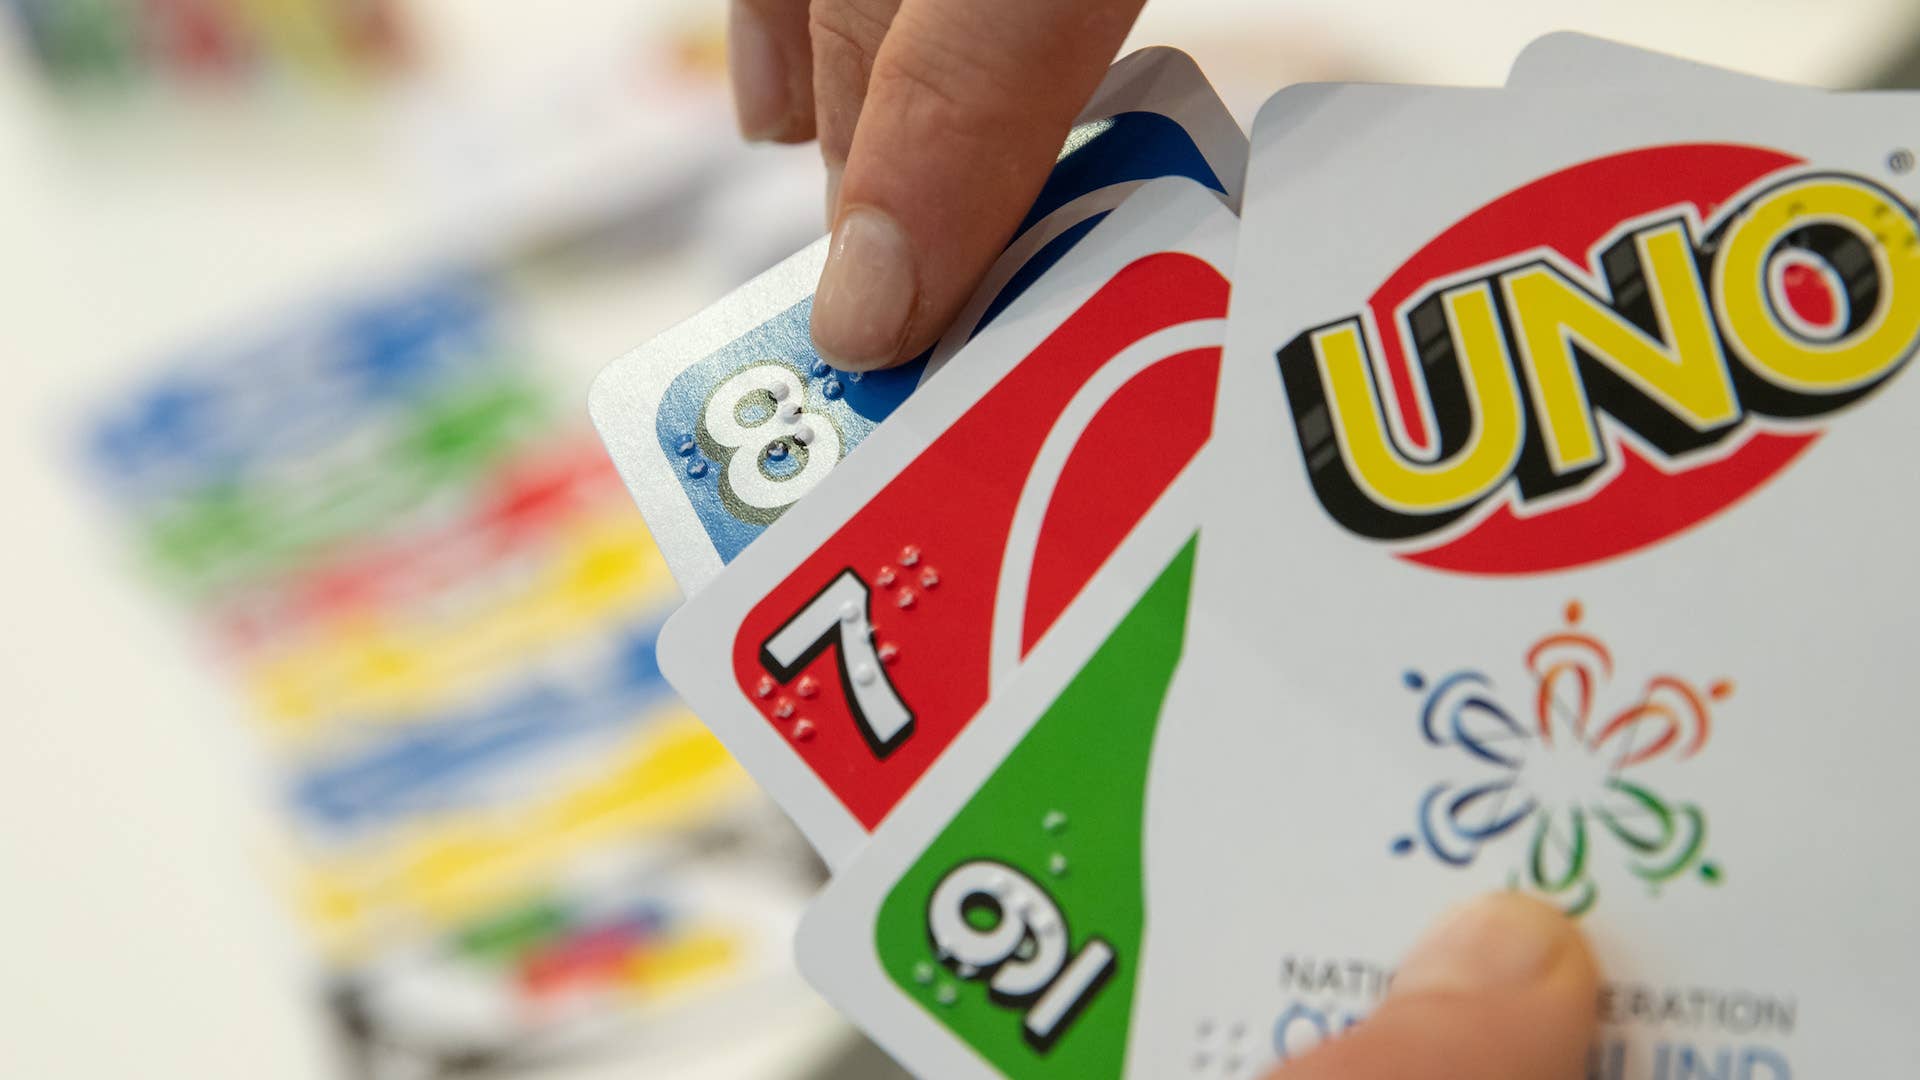 Mattel's Uno Braille card game printed with Braille.